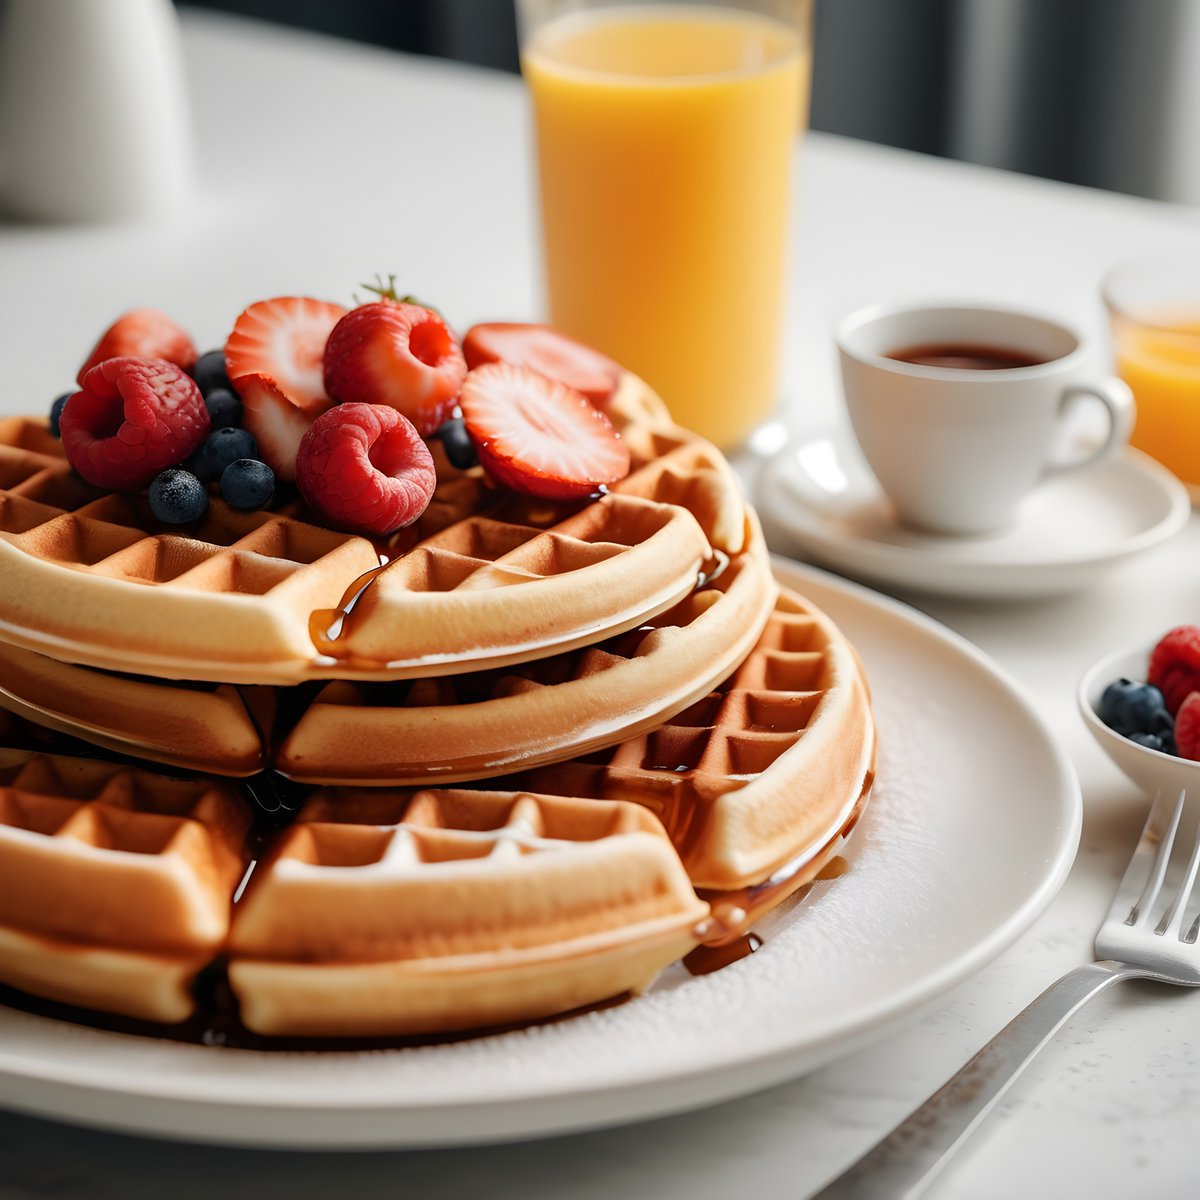 🥞 Happy Waffle Day! 
Whether you like them crispy or fluffy, with fruit or syrup, today is the perfect excuse to indulge in this delicious treat. Treat yourself to some waffles and share your favorite toppings below! 
🧇 #WaffleDay #IndulgeInDeliciousness 🍓🍯🤤